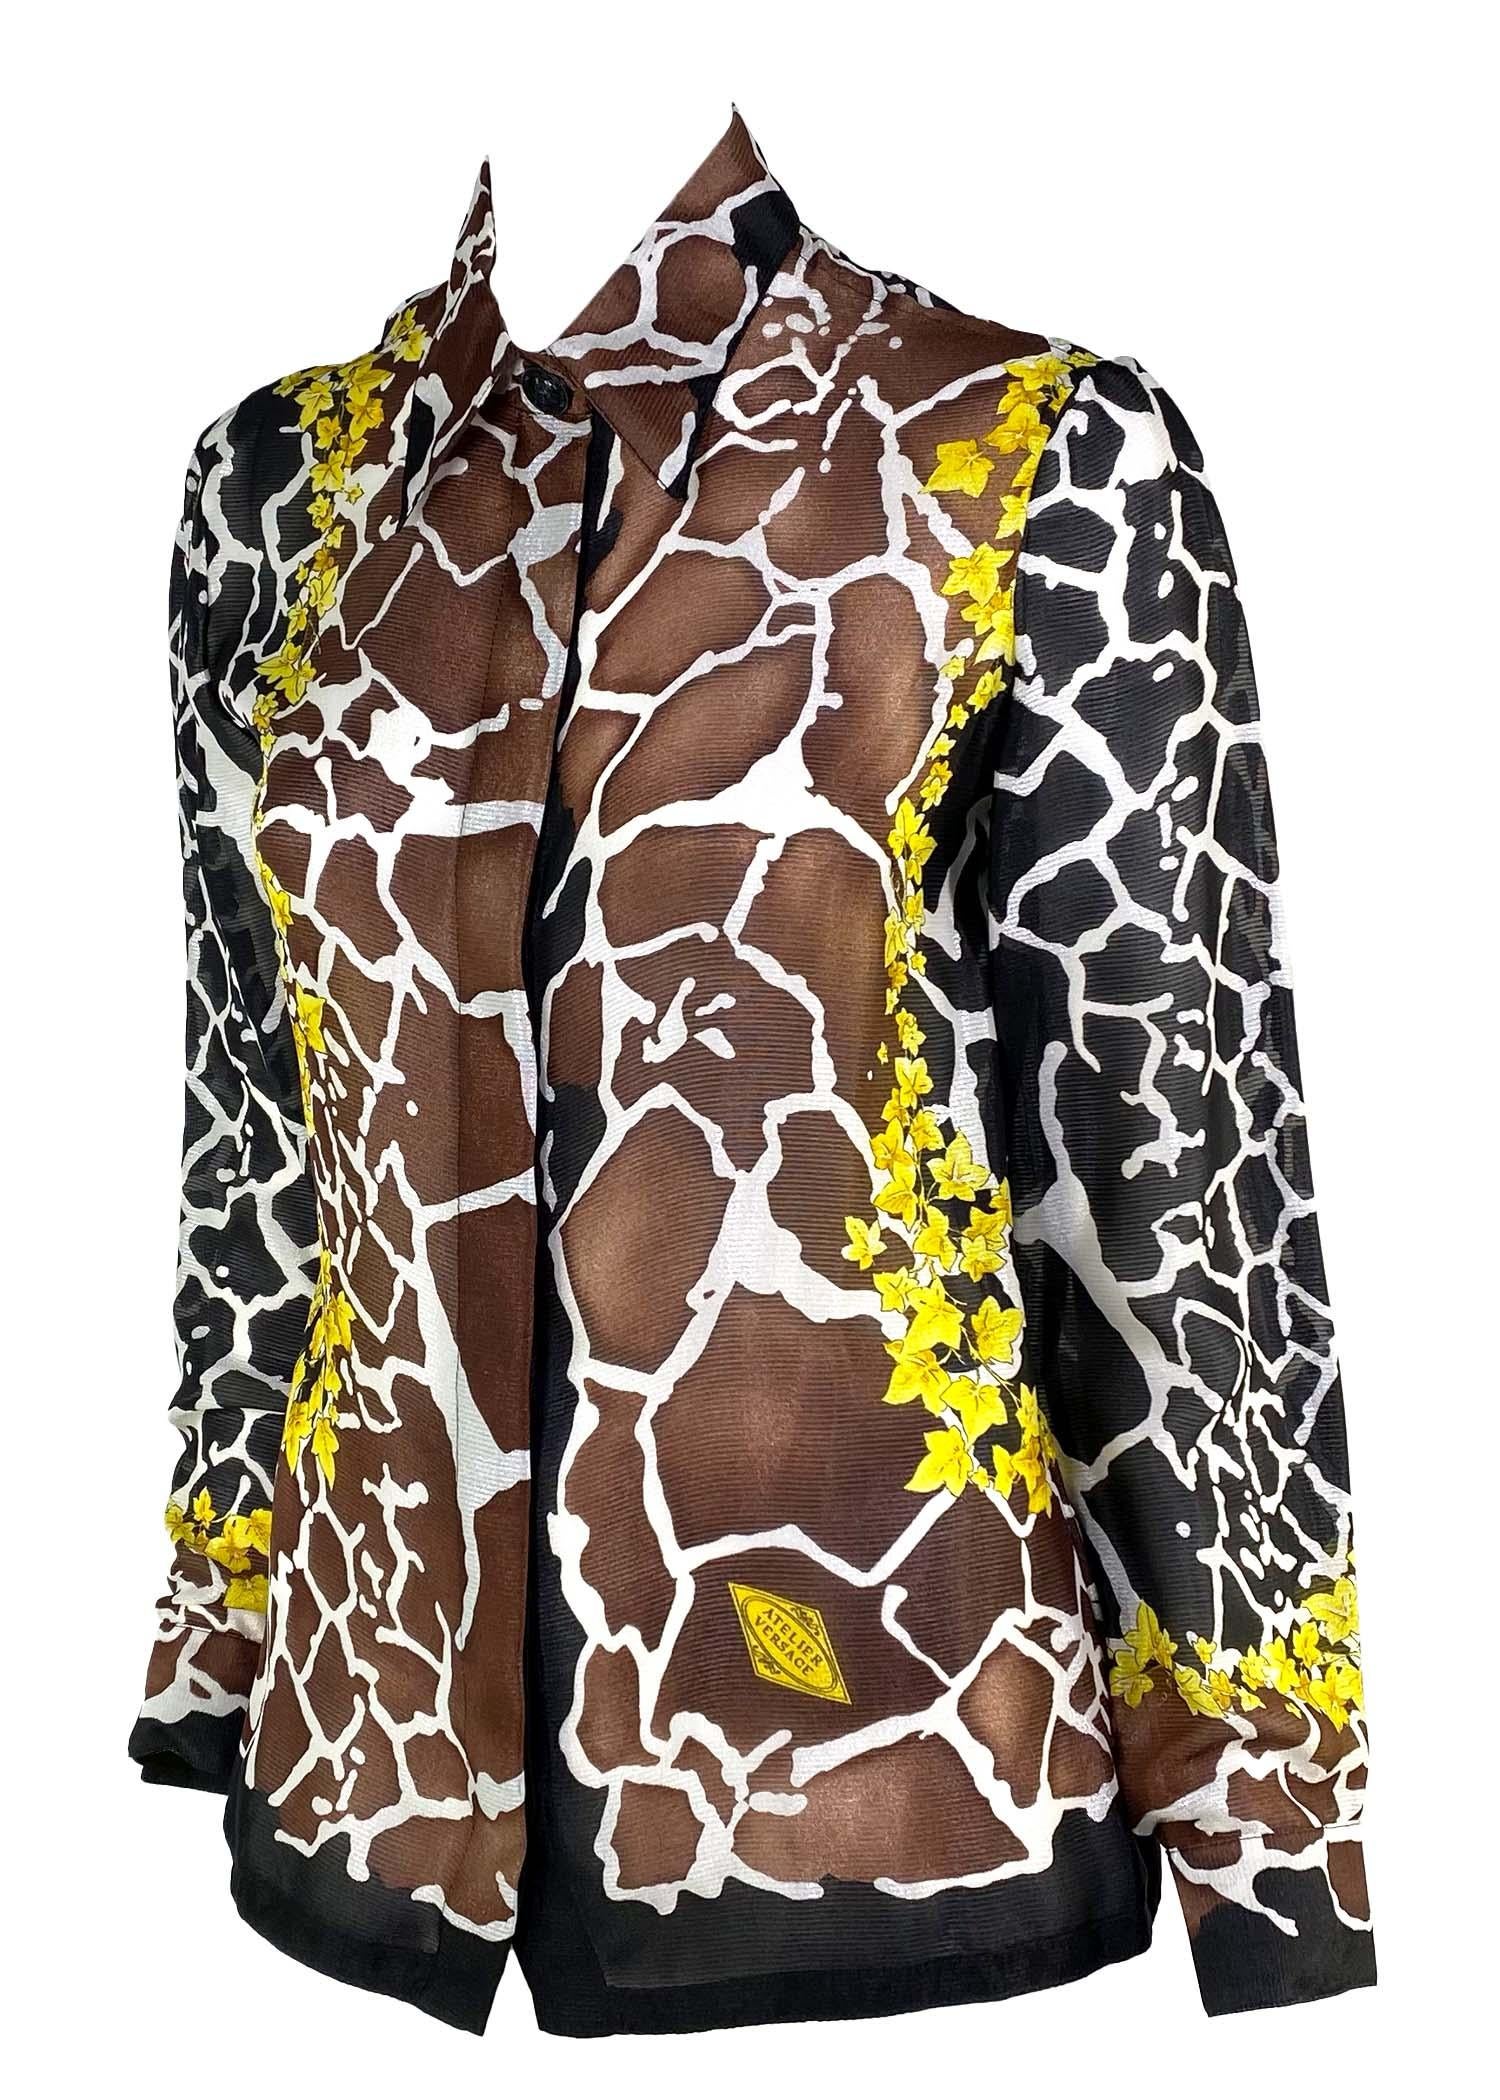 Presenting a black and brown giraffe Gianni Versace Couture sheer button up shirt, designed by Gianni Versace for his Spring/Summer 1996 collection. This top is constructed entirely of  light semi-sheer Atelier Versace silk with animal print and